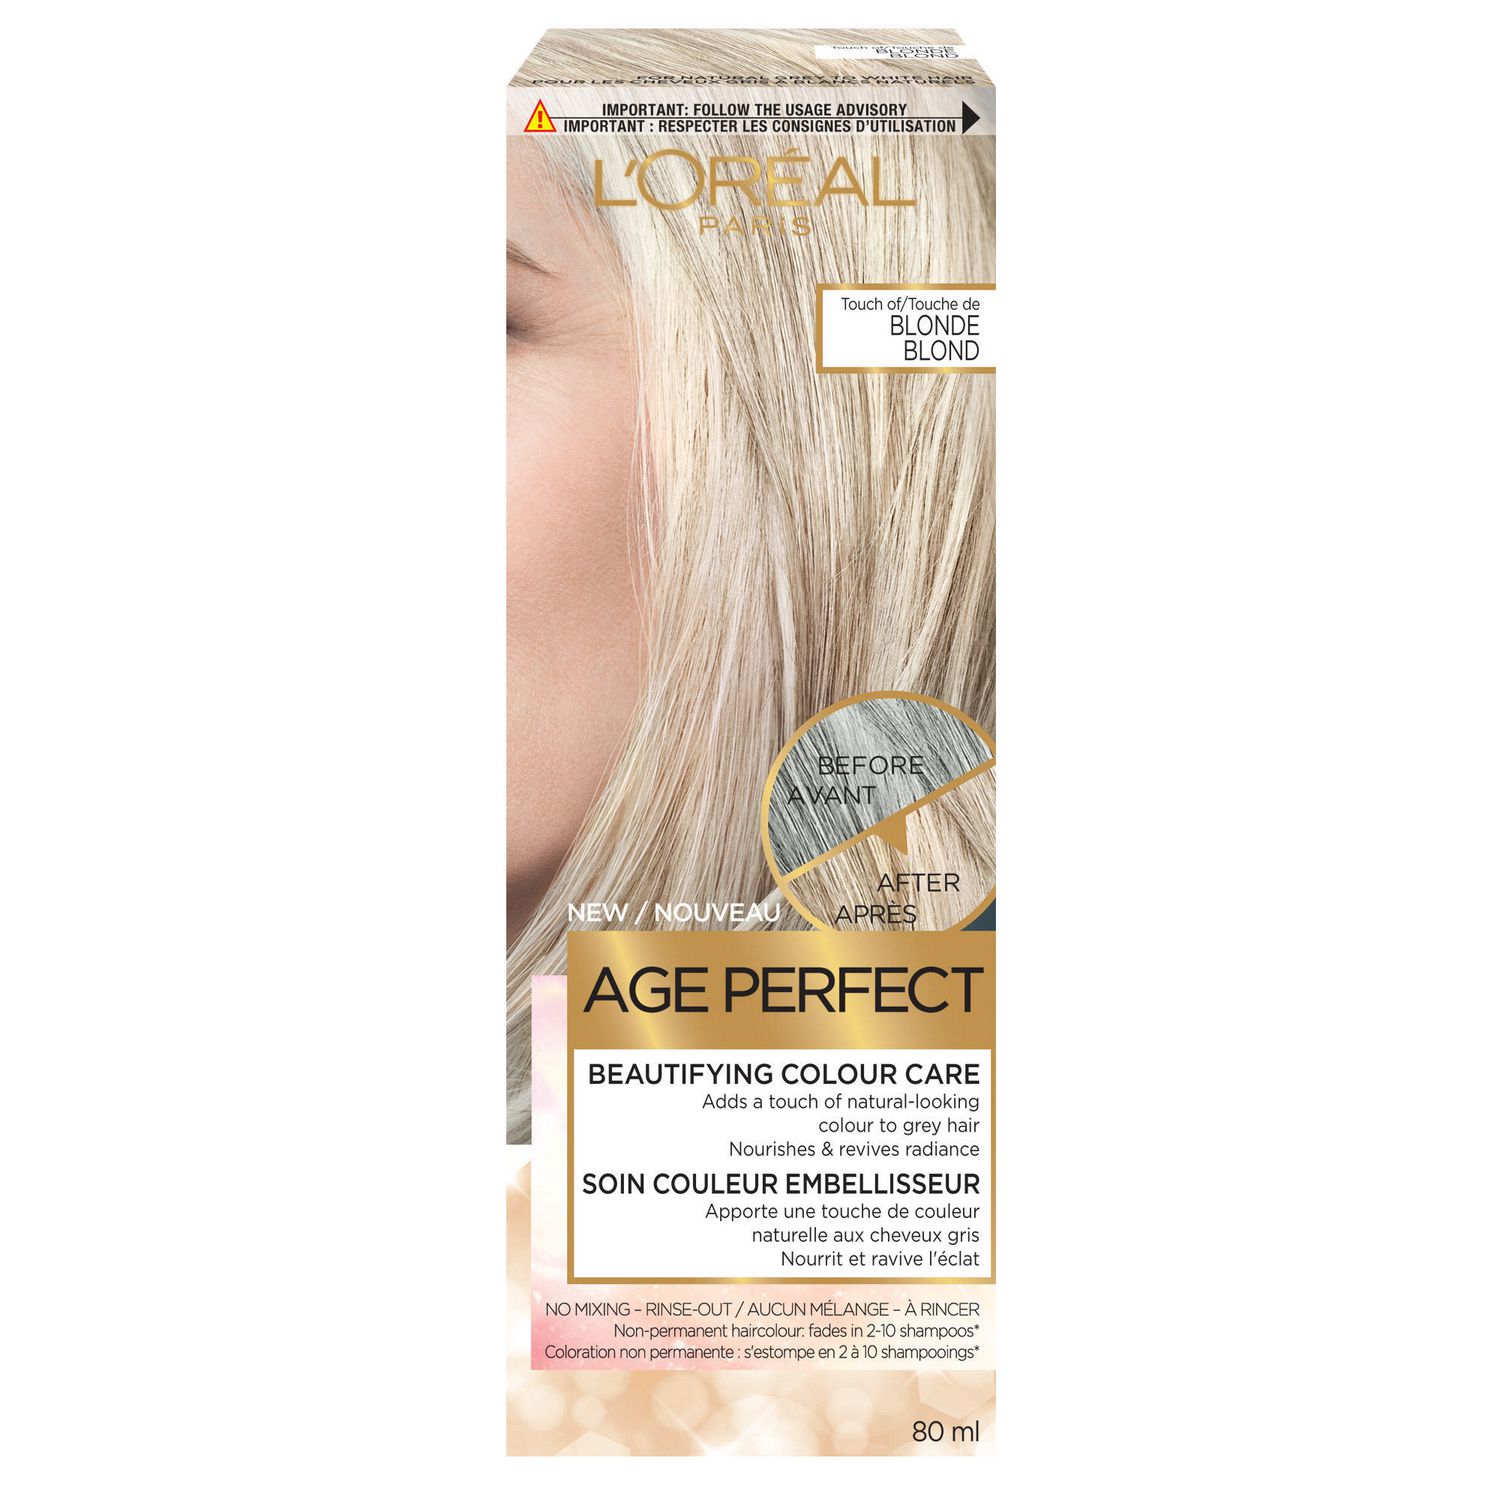 L Oreal Paris Age Perfect Beautifying Colour Care Temporary Hair